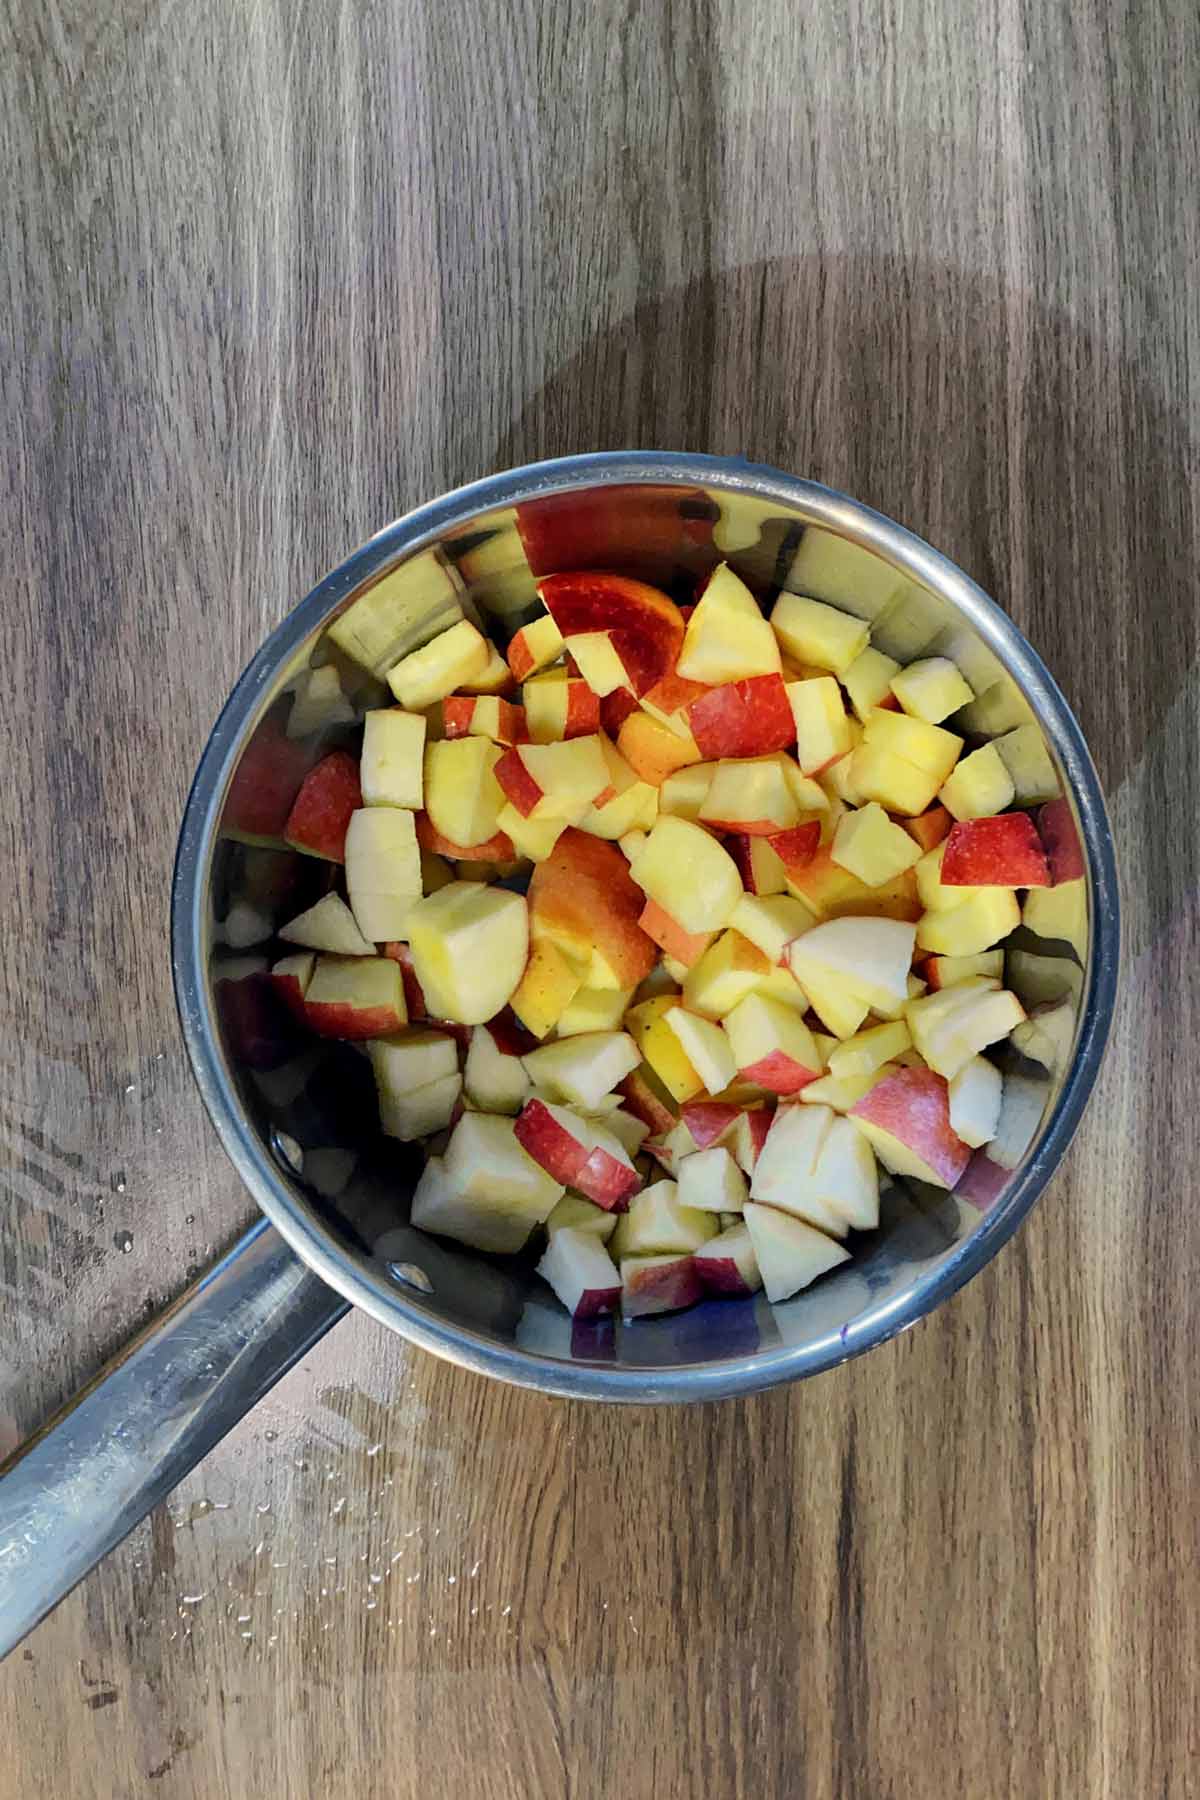 A saucepan with chopped apples in it.